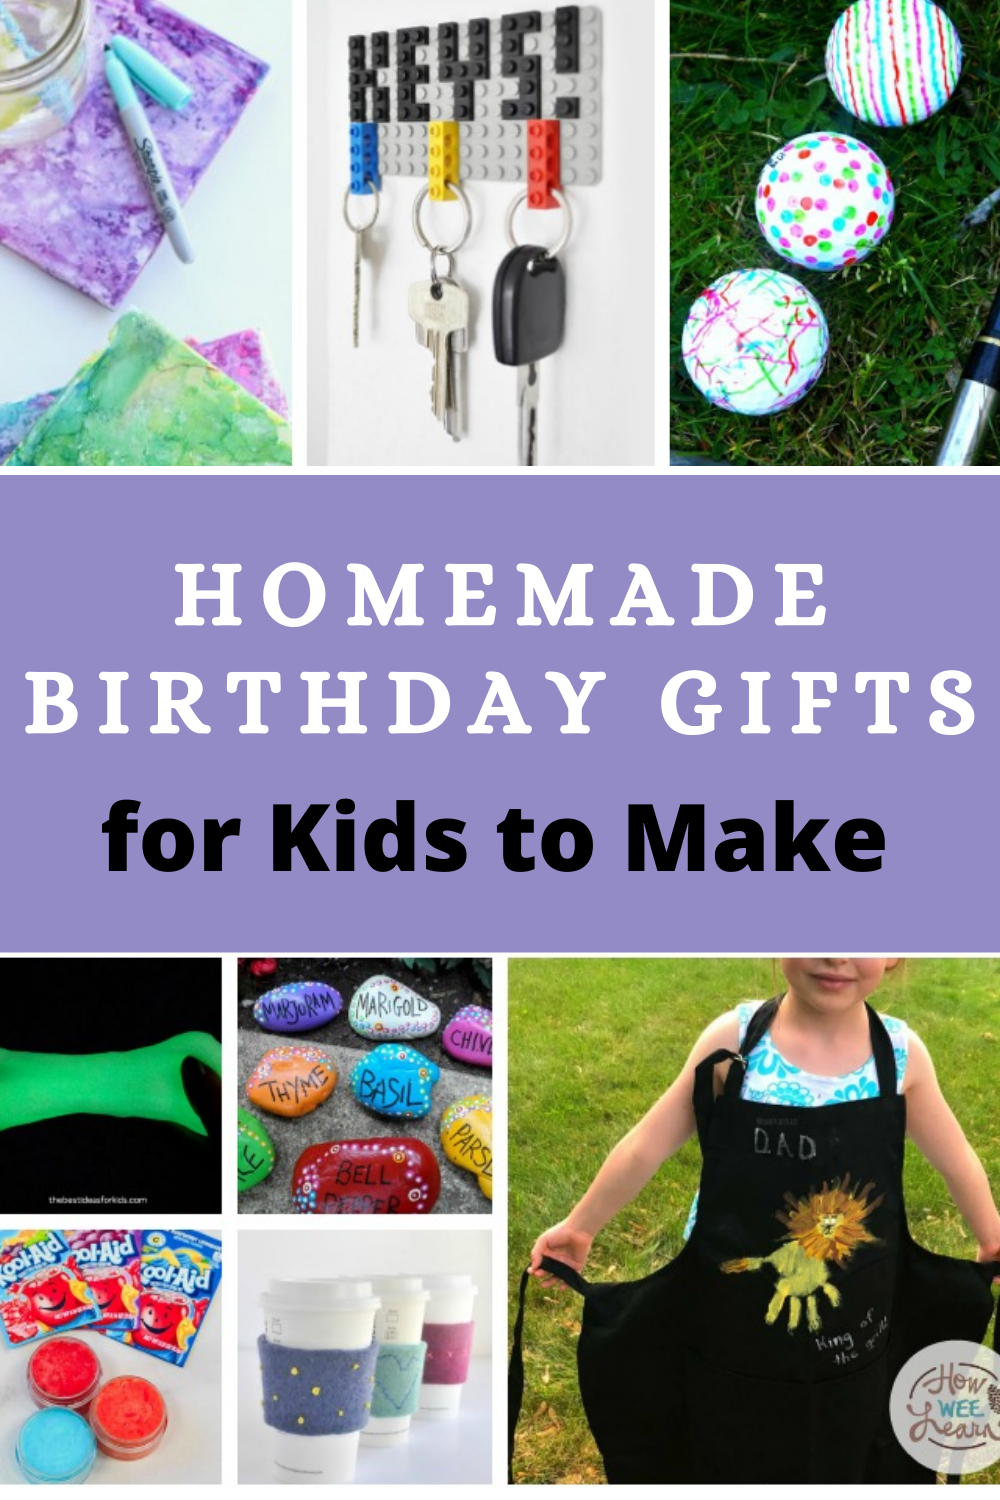 Homemade Birthday Gifts for Kids to Make